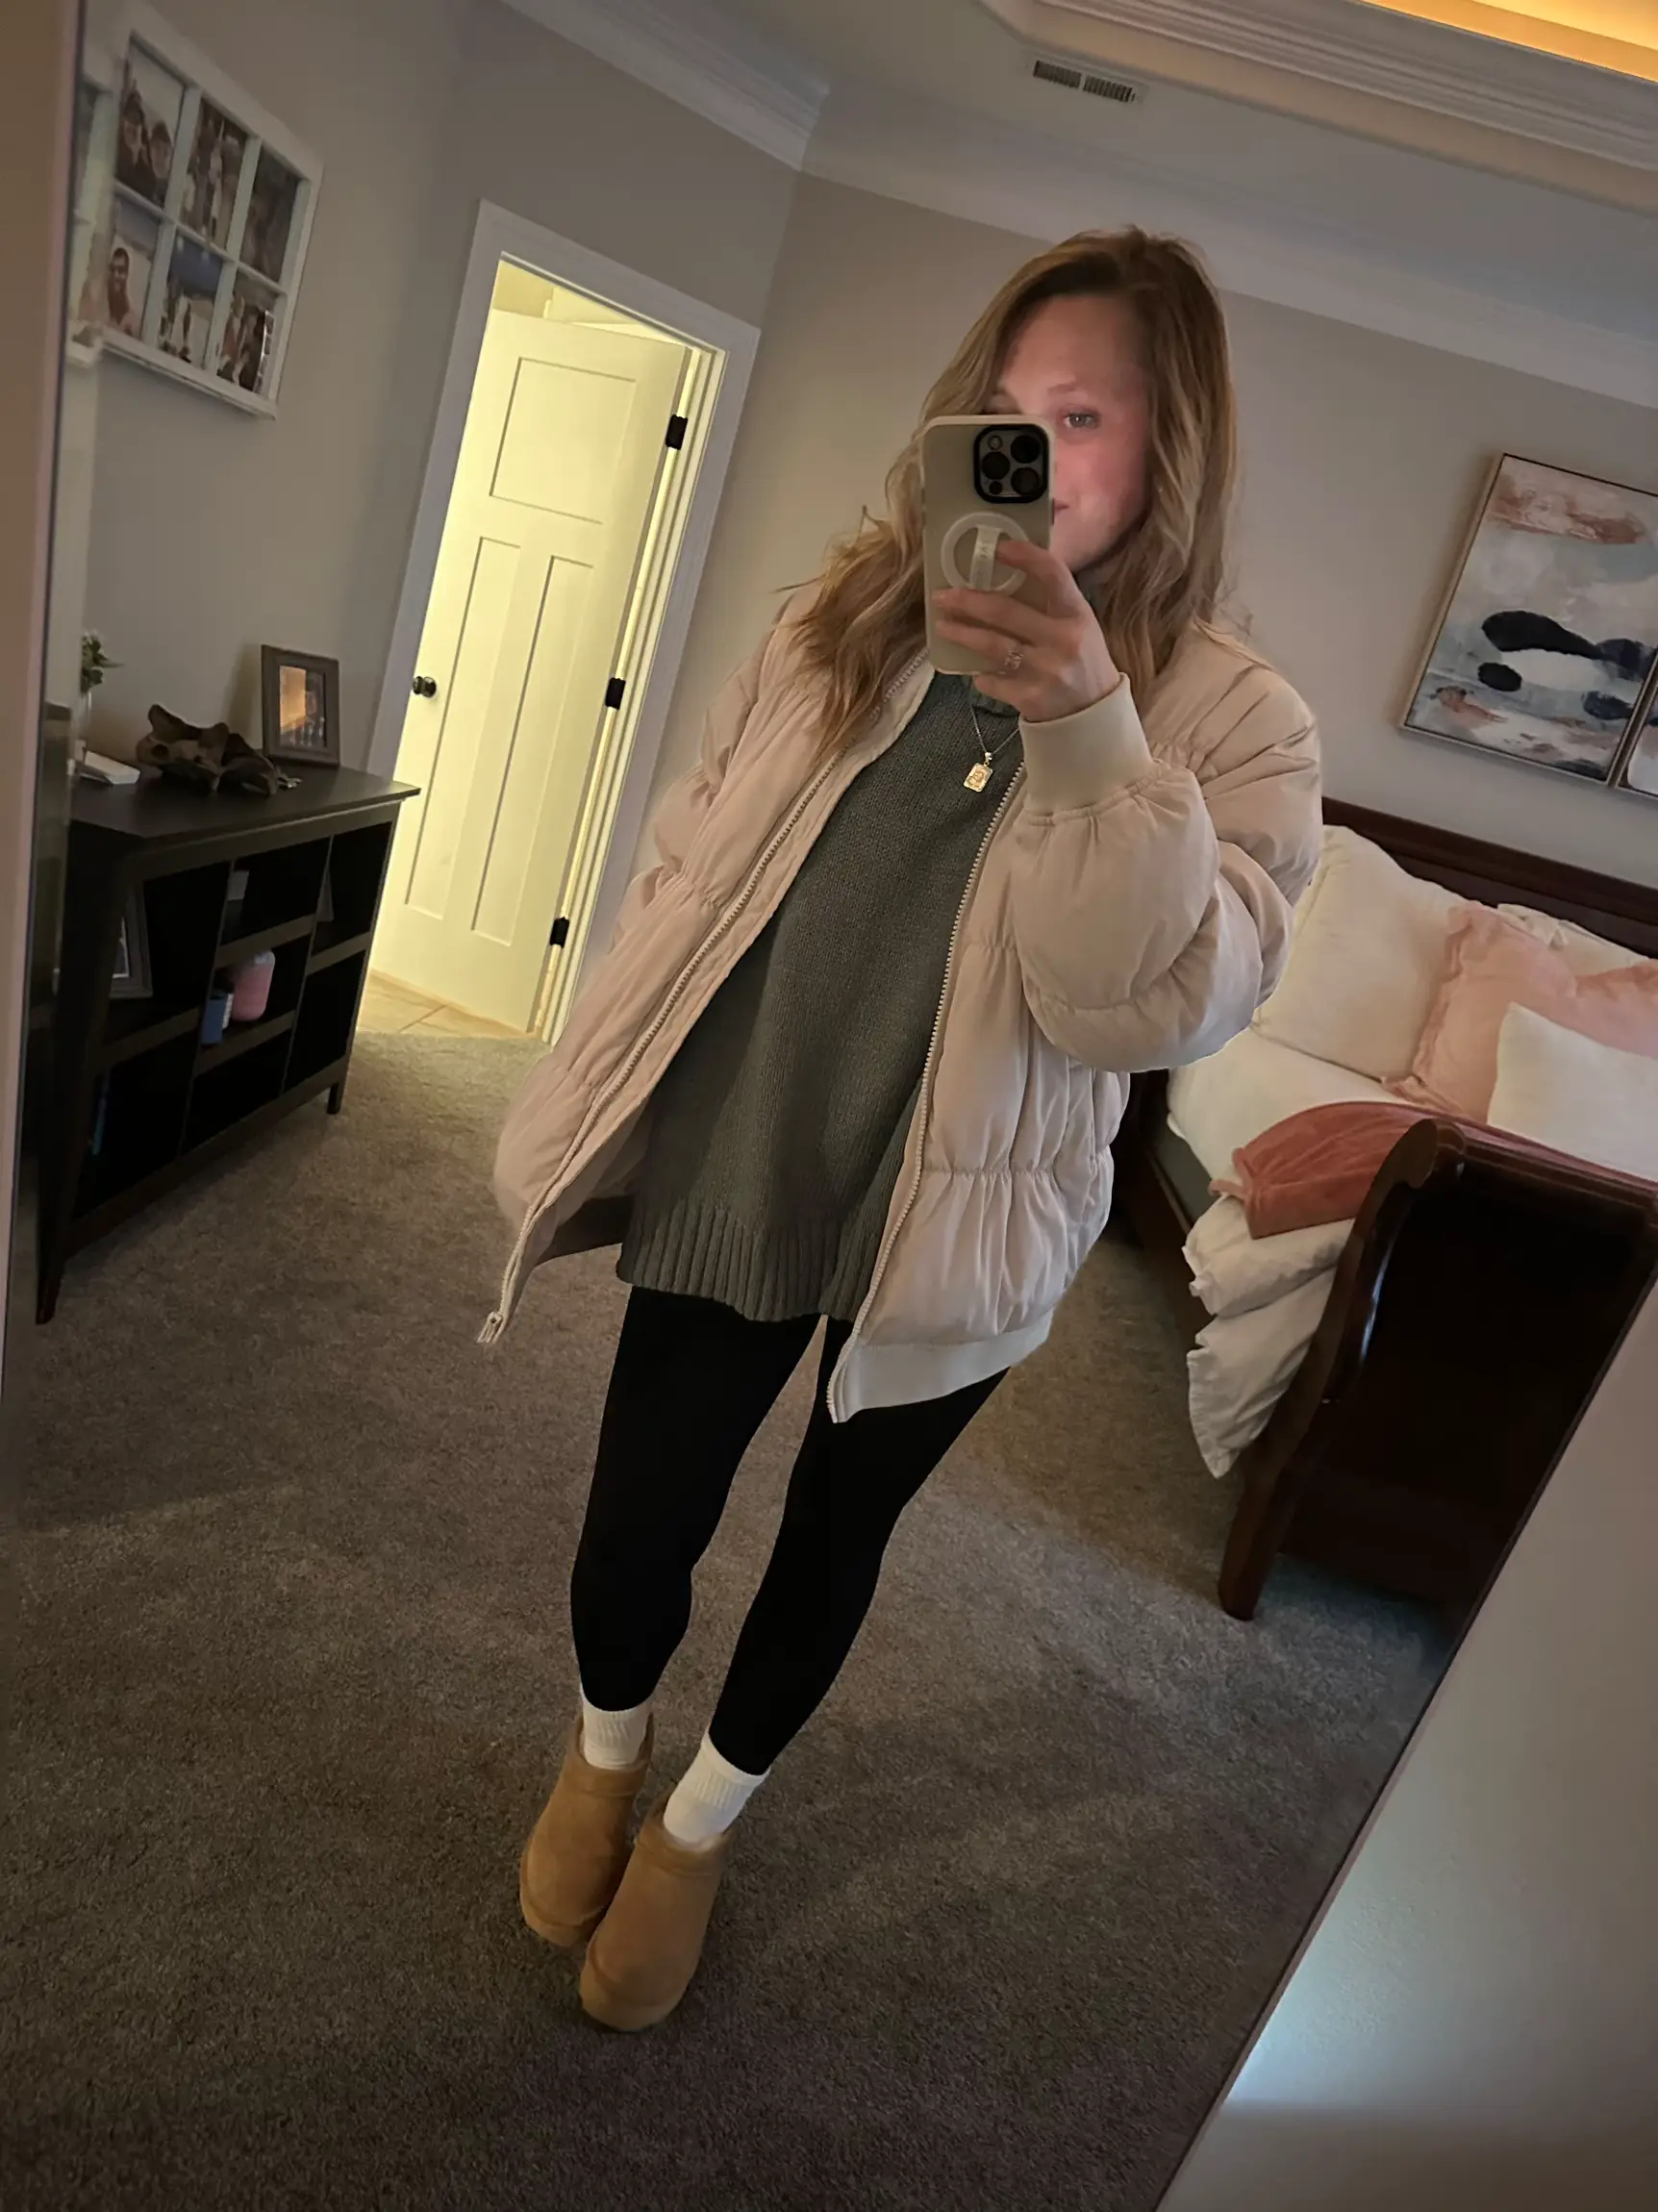 Go-to outfit for running errands - comfy leggings!